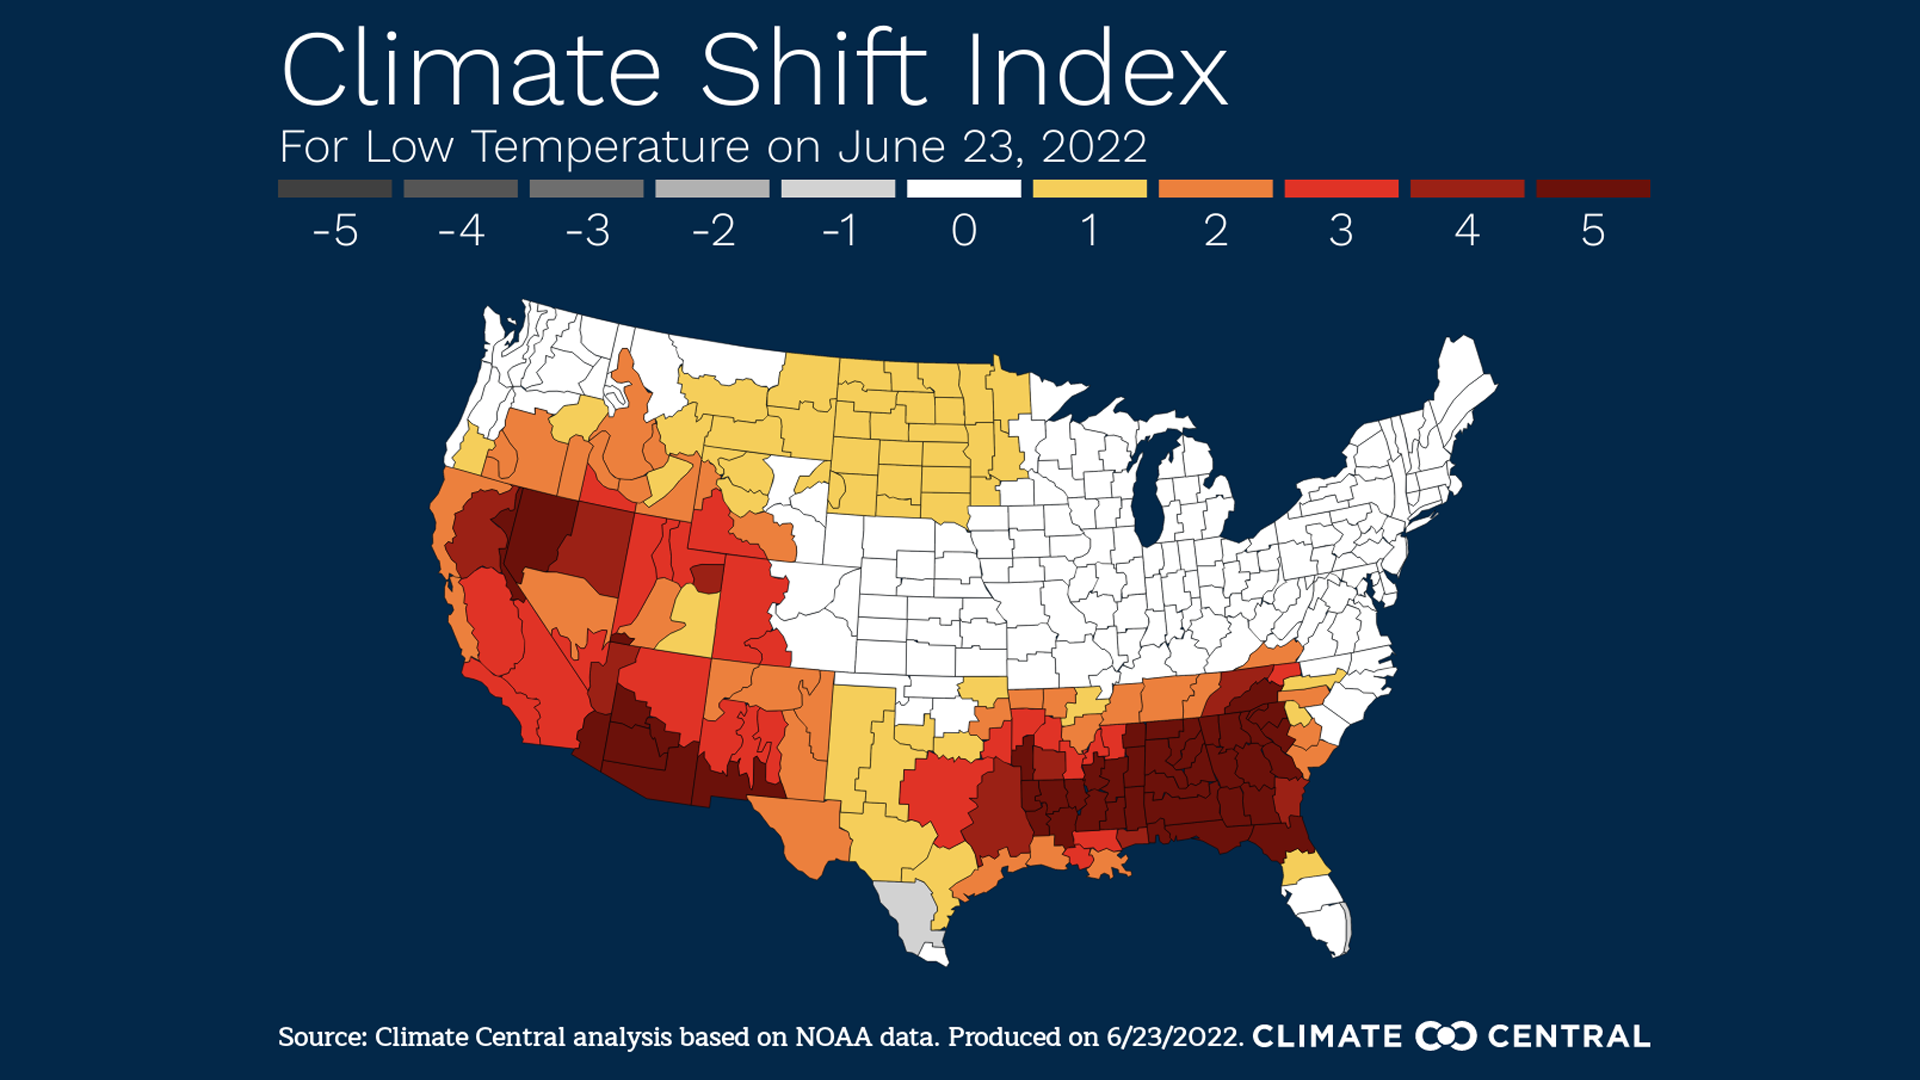 Climate Shift Index showing climate change's influence on a day's temperatures in the U.S.